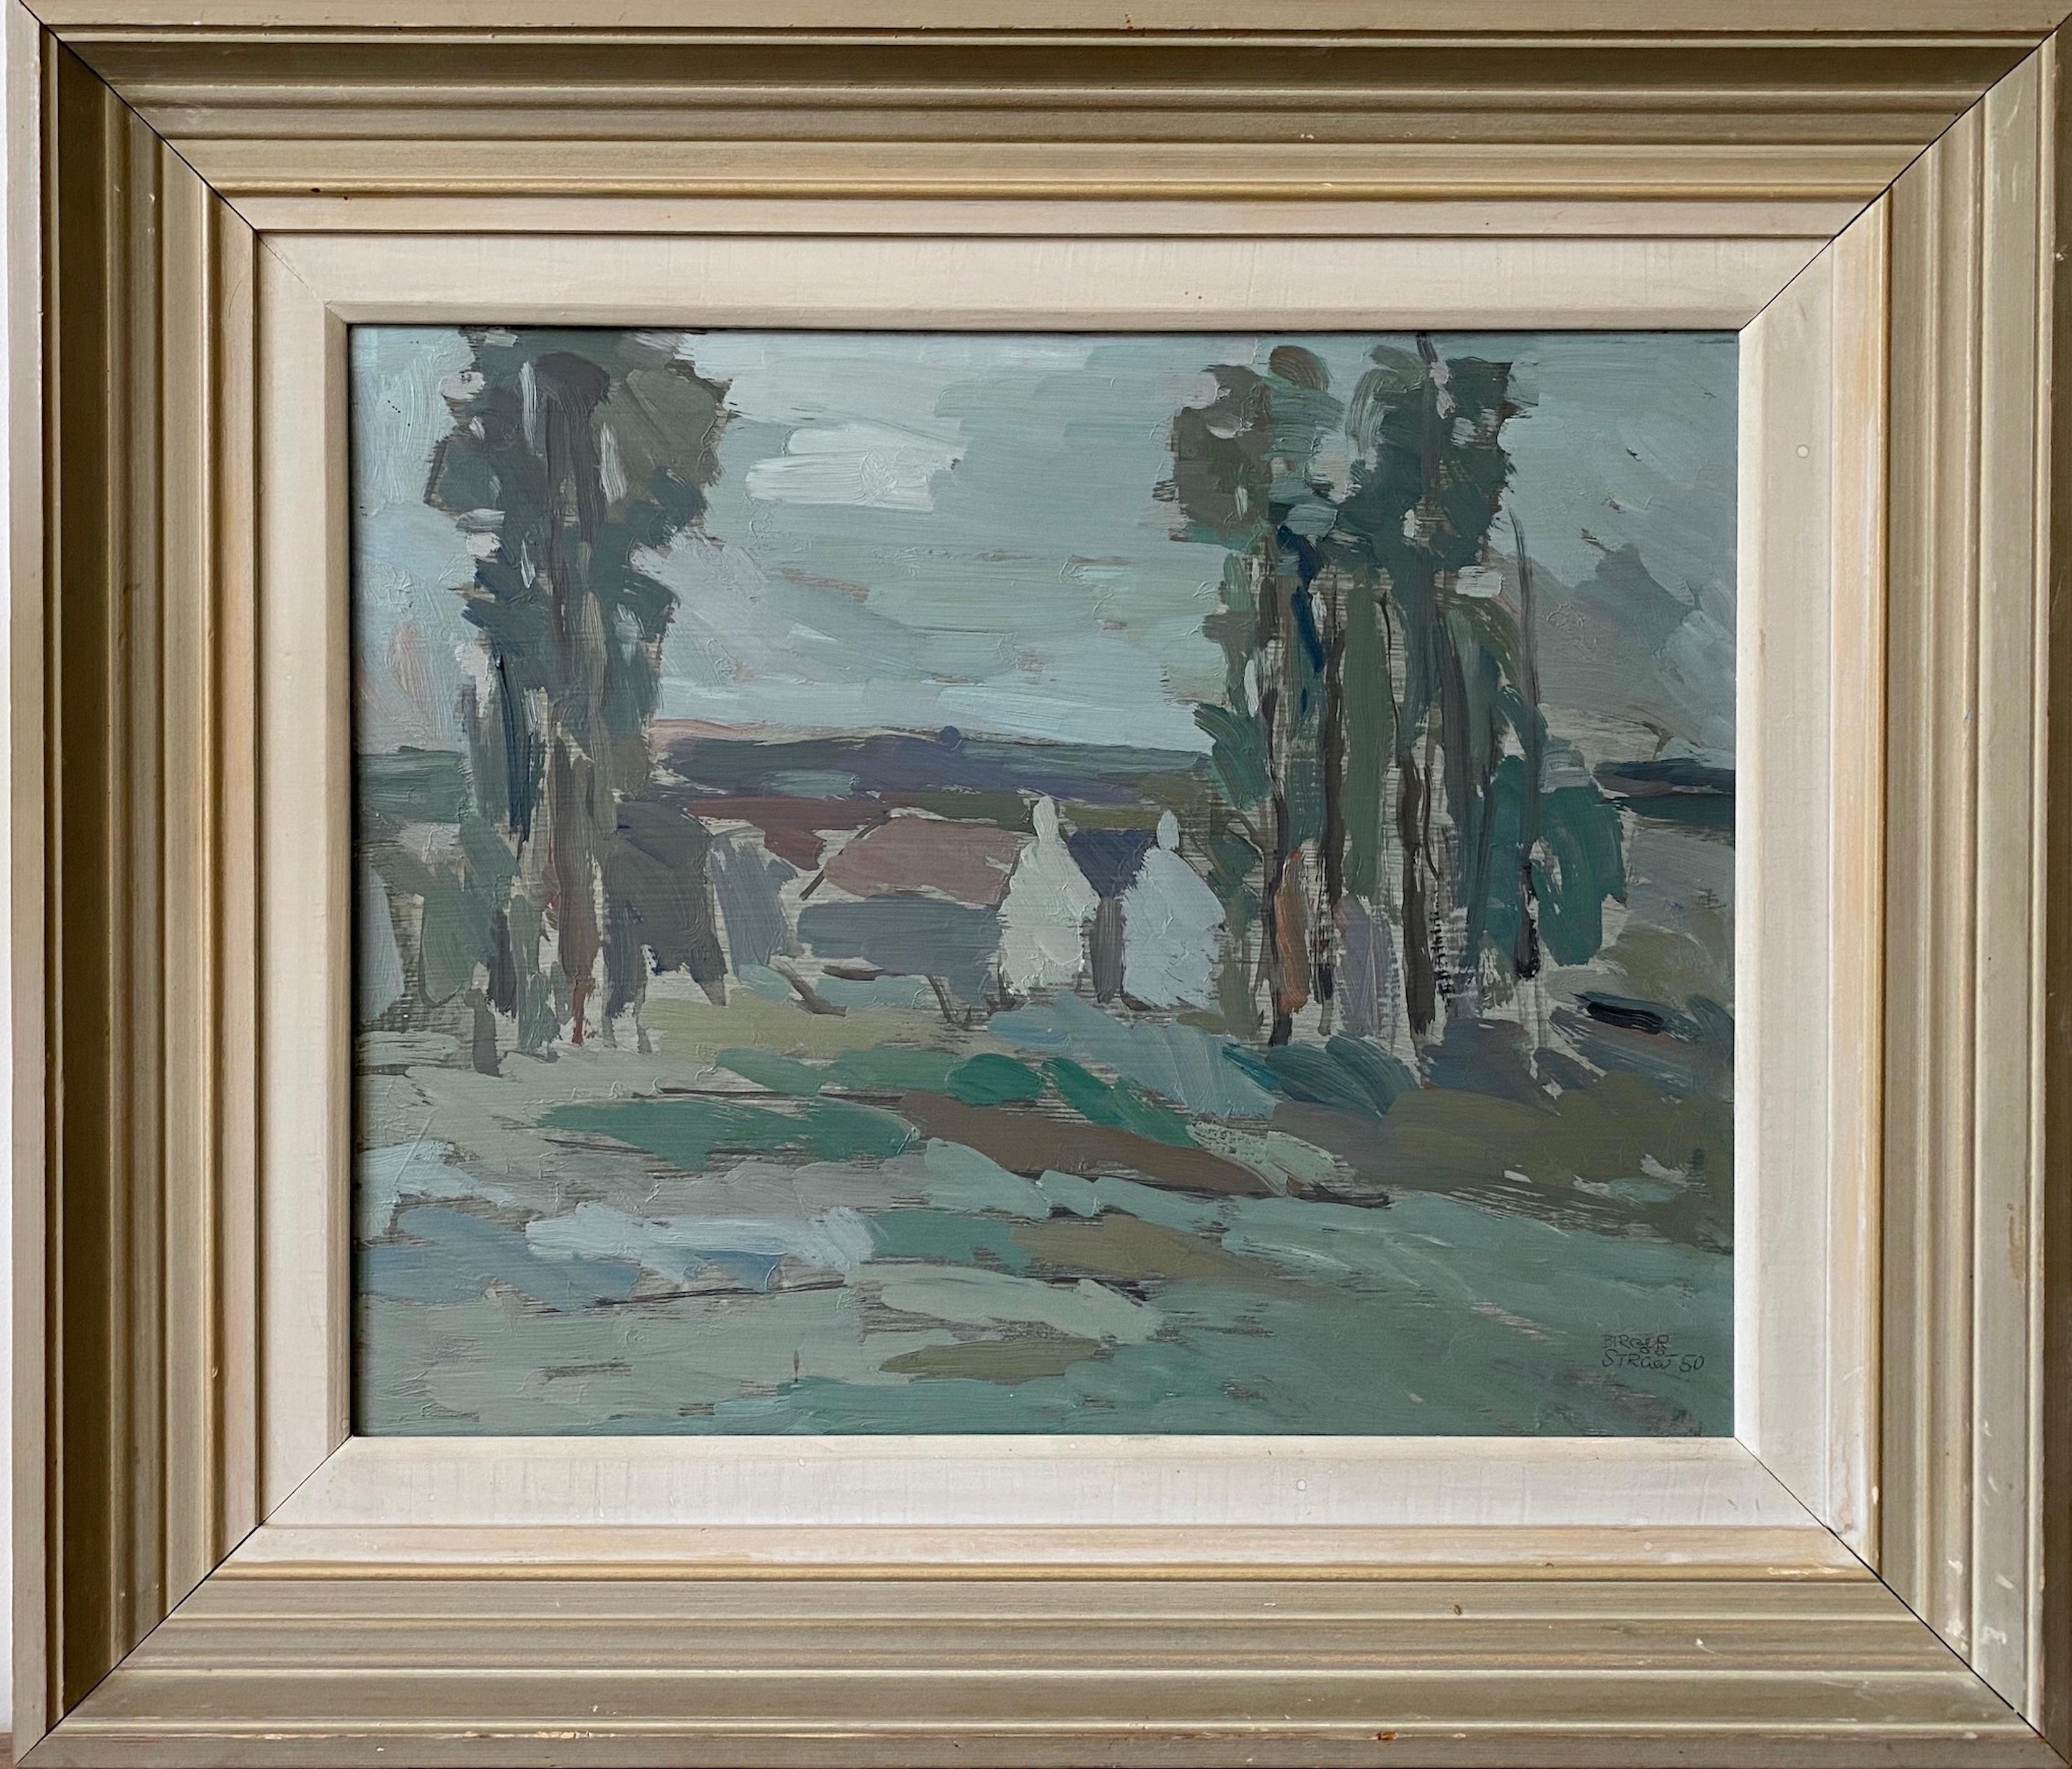 Unknown Landscape Painting - 1950 Vintage Framed Abstract Landscape Oil Painting - Teal Meadow